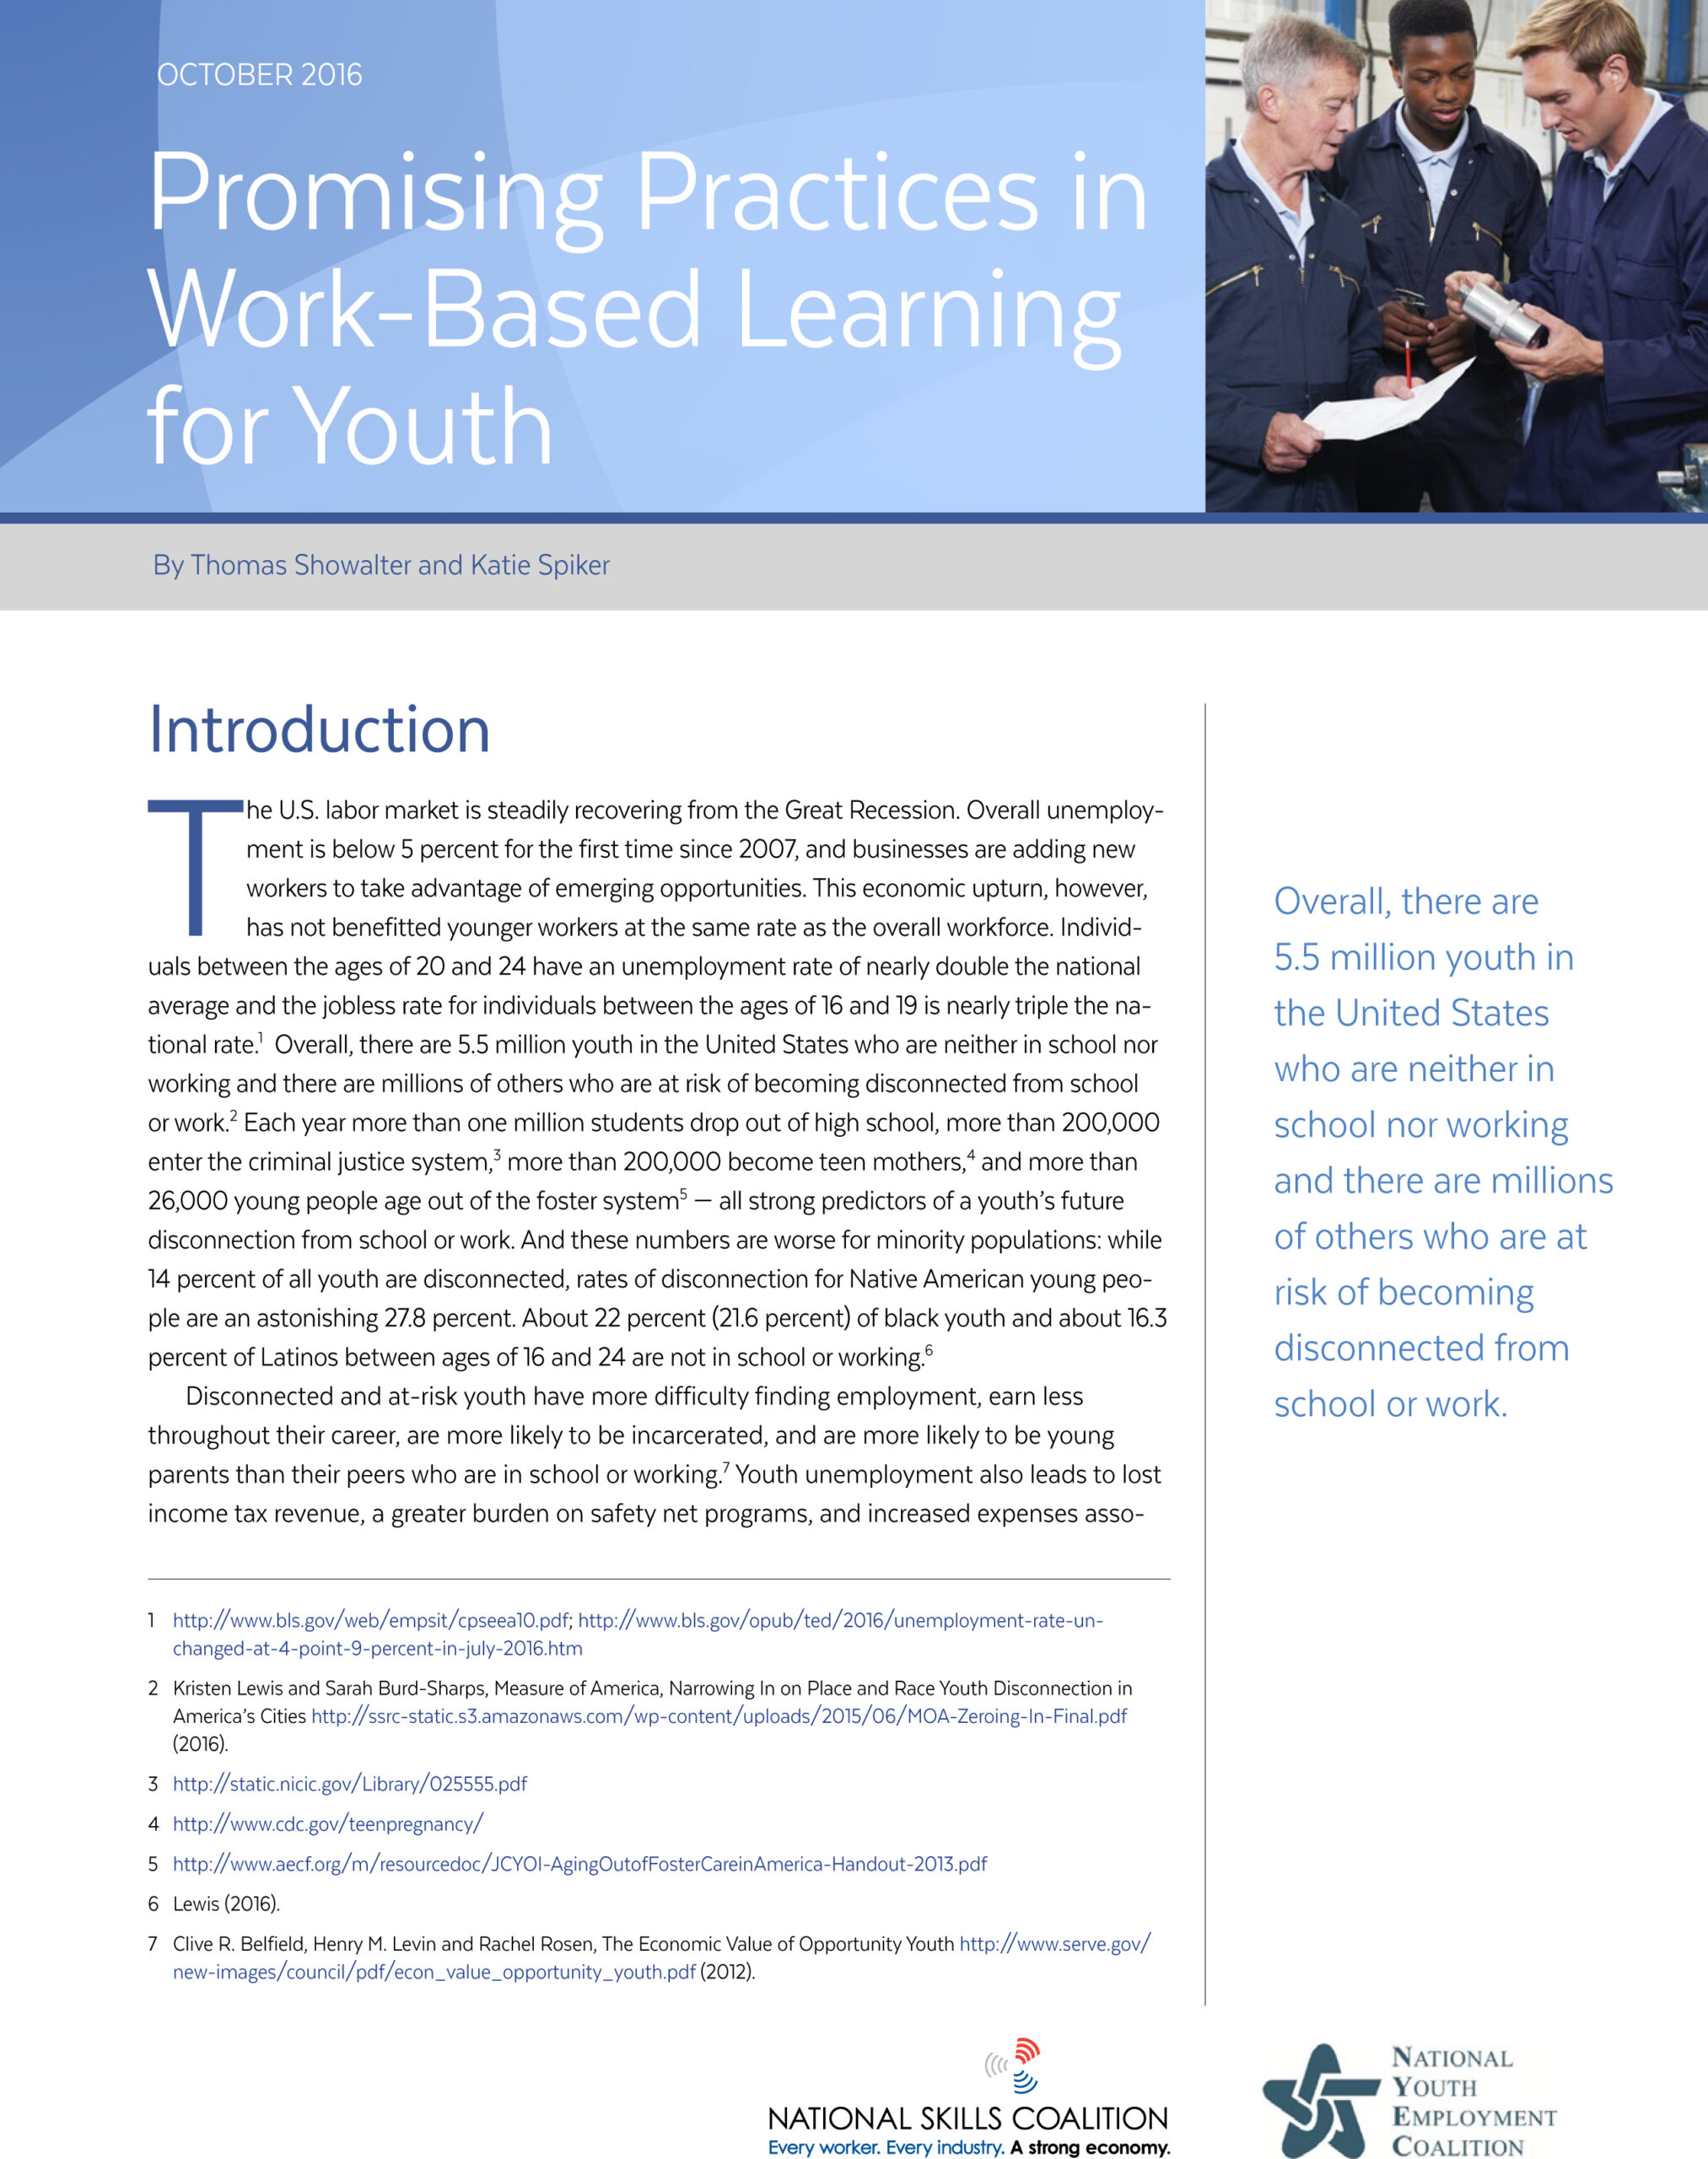 New paper highlights promising practices in work-based learning for youth